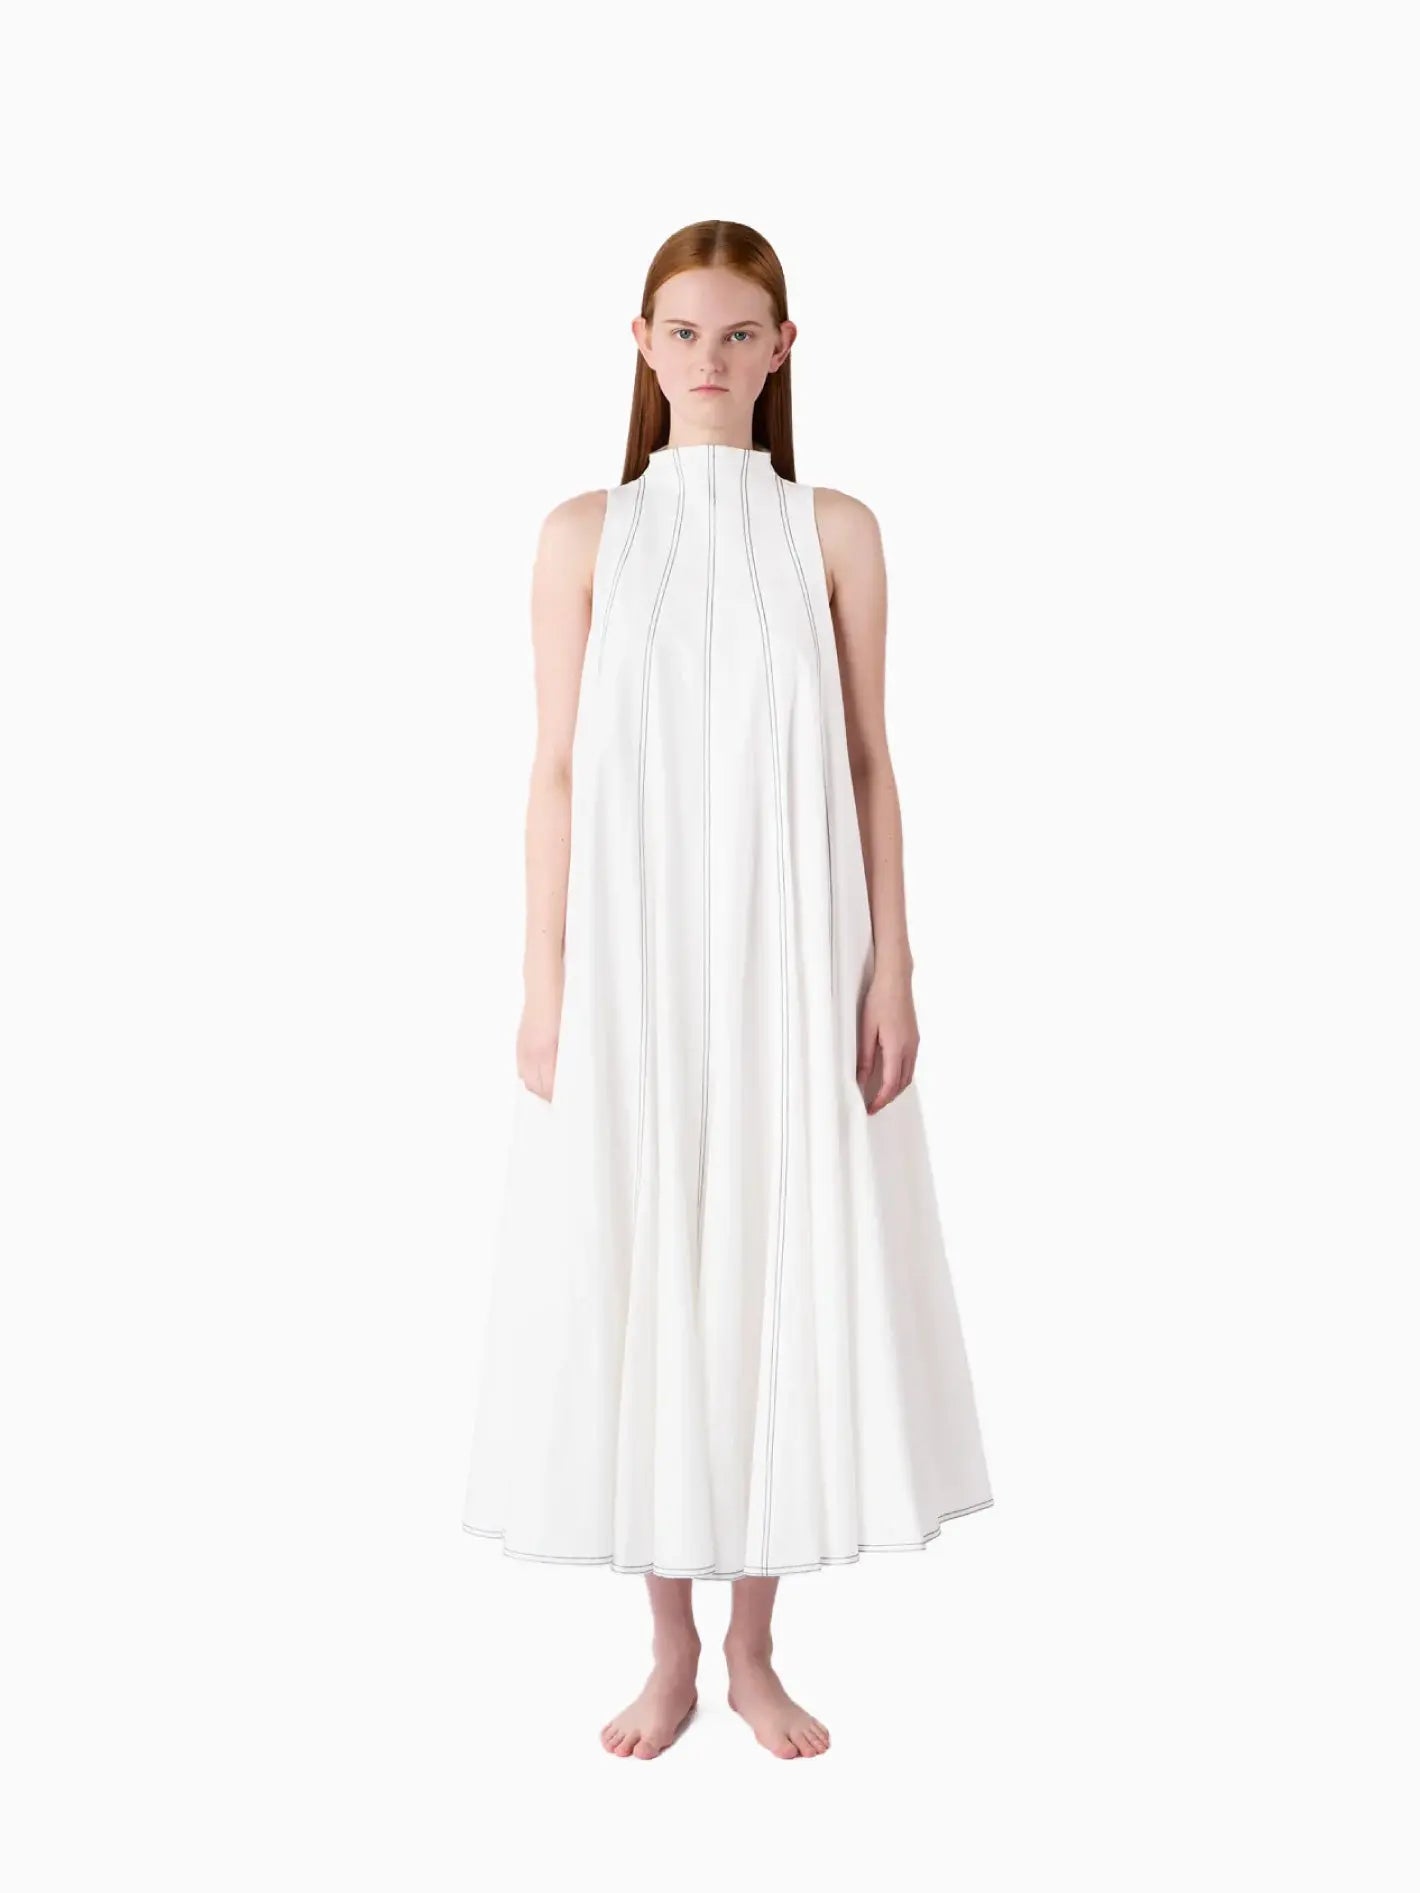 A Sunnei Tulipano Dress: a sleeveless white dress with a high neckline and a full, flowing skirt. The dress features vertical stitching details that run from the neckline down the bodice and along the skirt, creating a structured look. Available at BassalStore in Barcelona. The background is plain white.